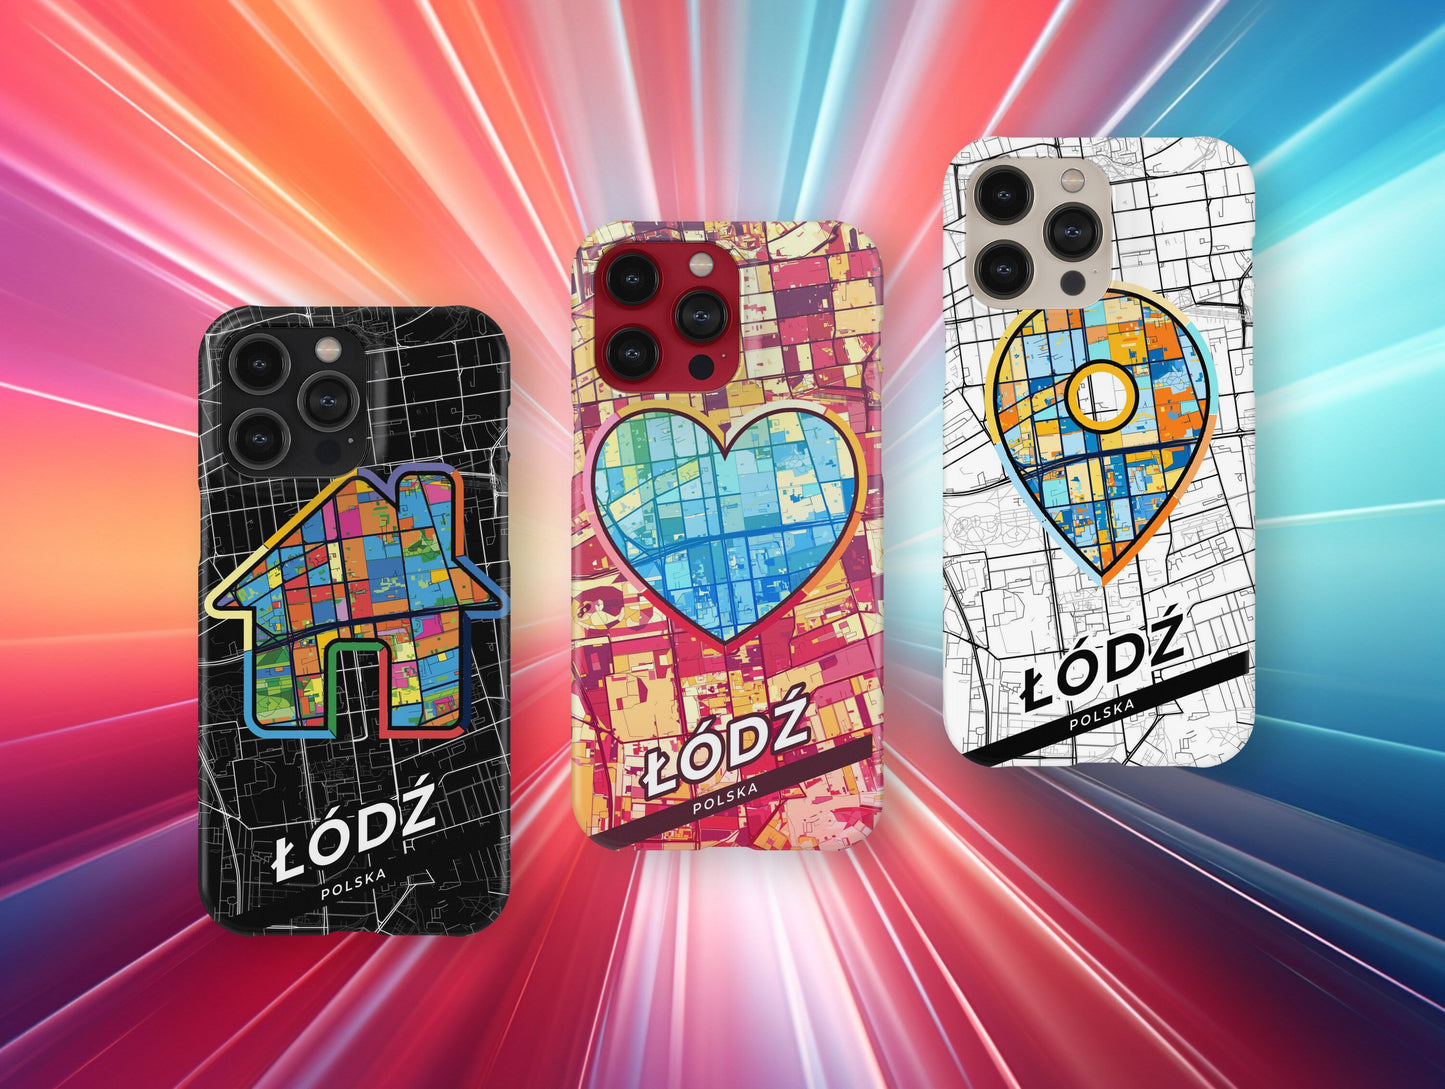 Łódź Poland slim phone case with colorful icon. Birthday, wedding or housewarming gift. Couple match cases.